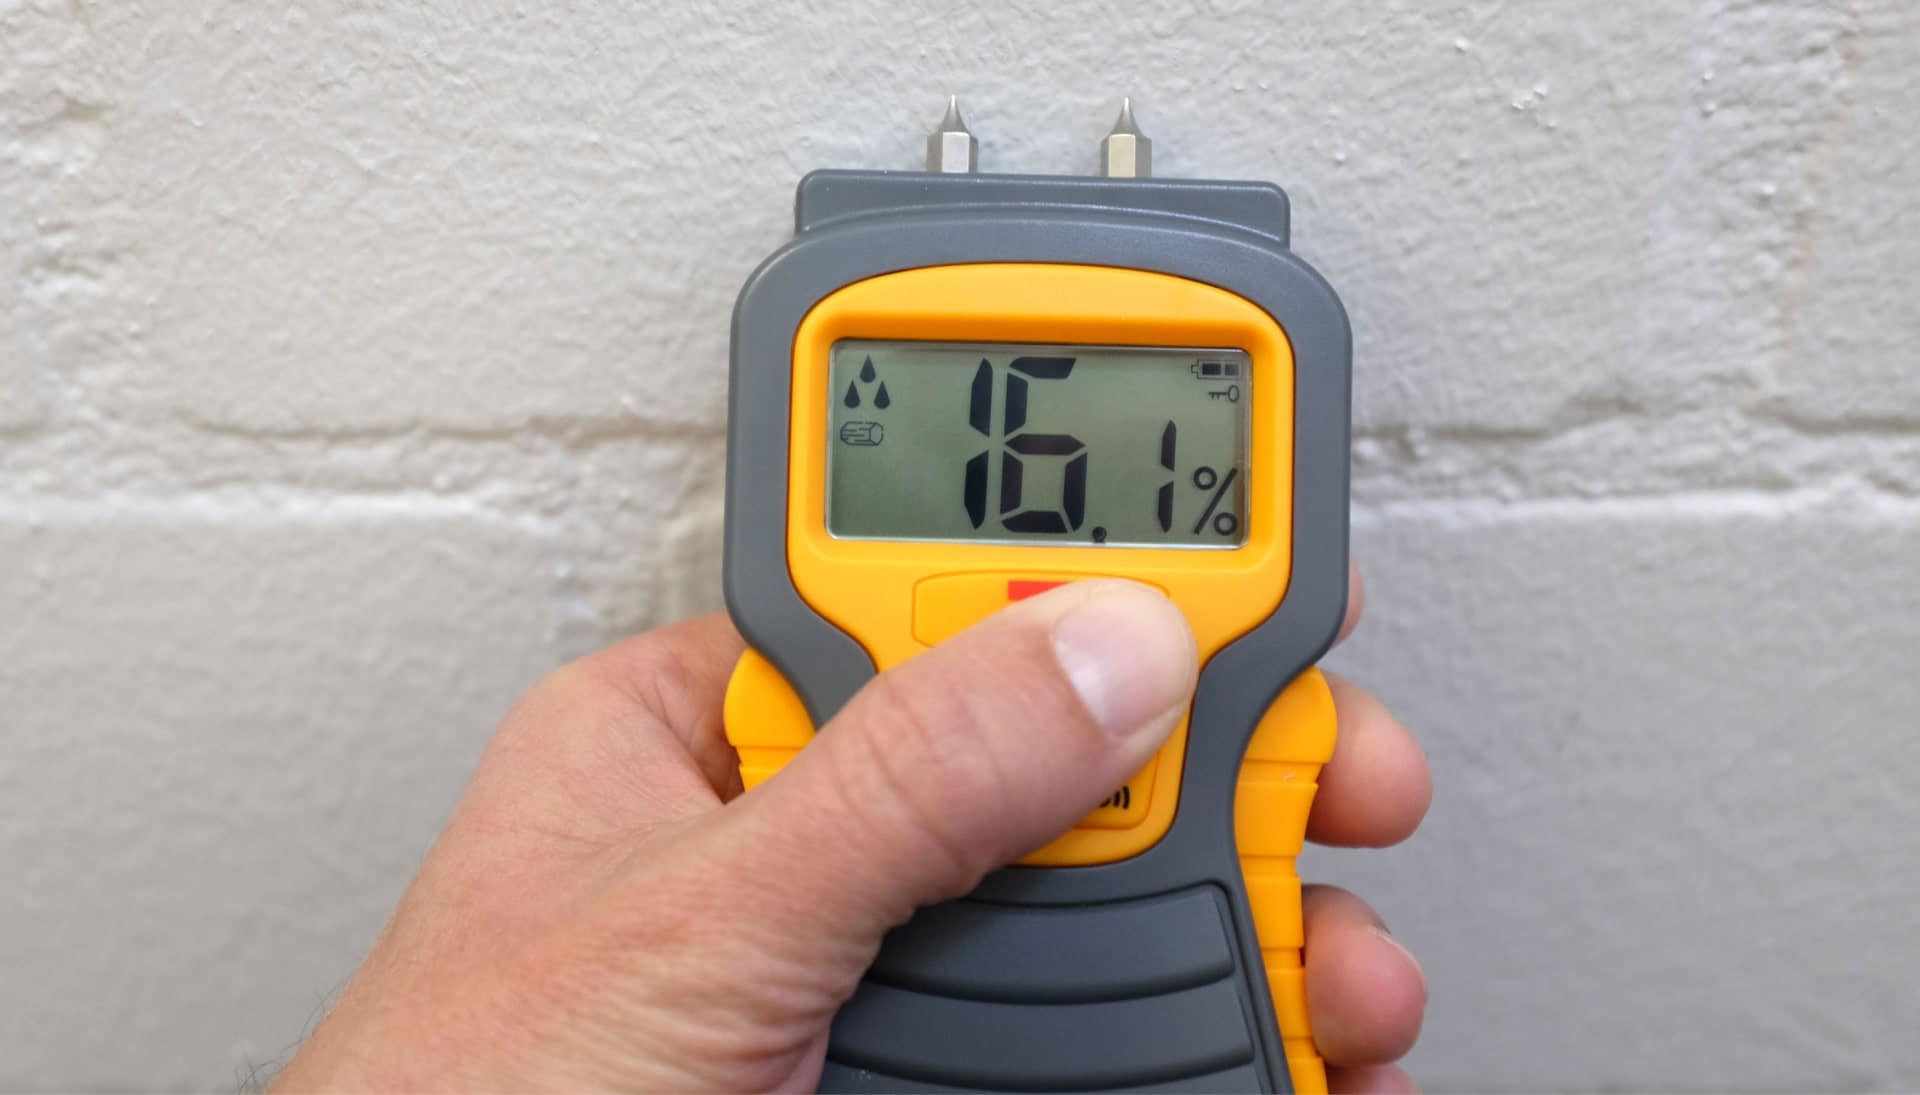 We provide fast, accurate, and affordable mold testing services in Topeka, Kansas.